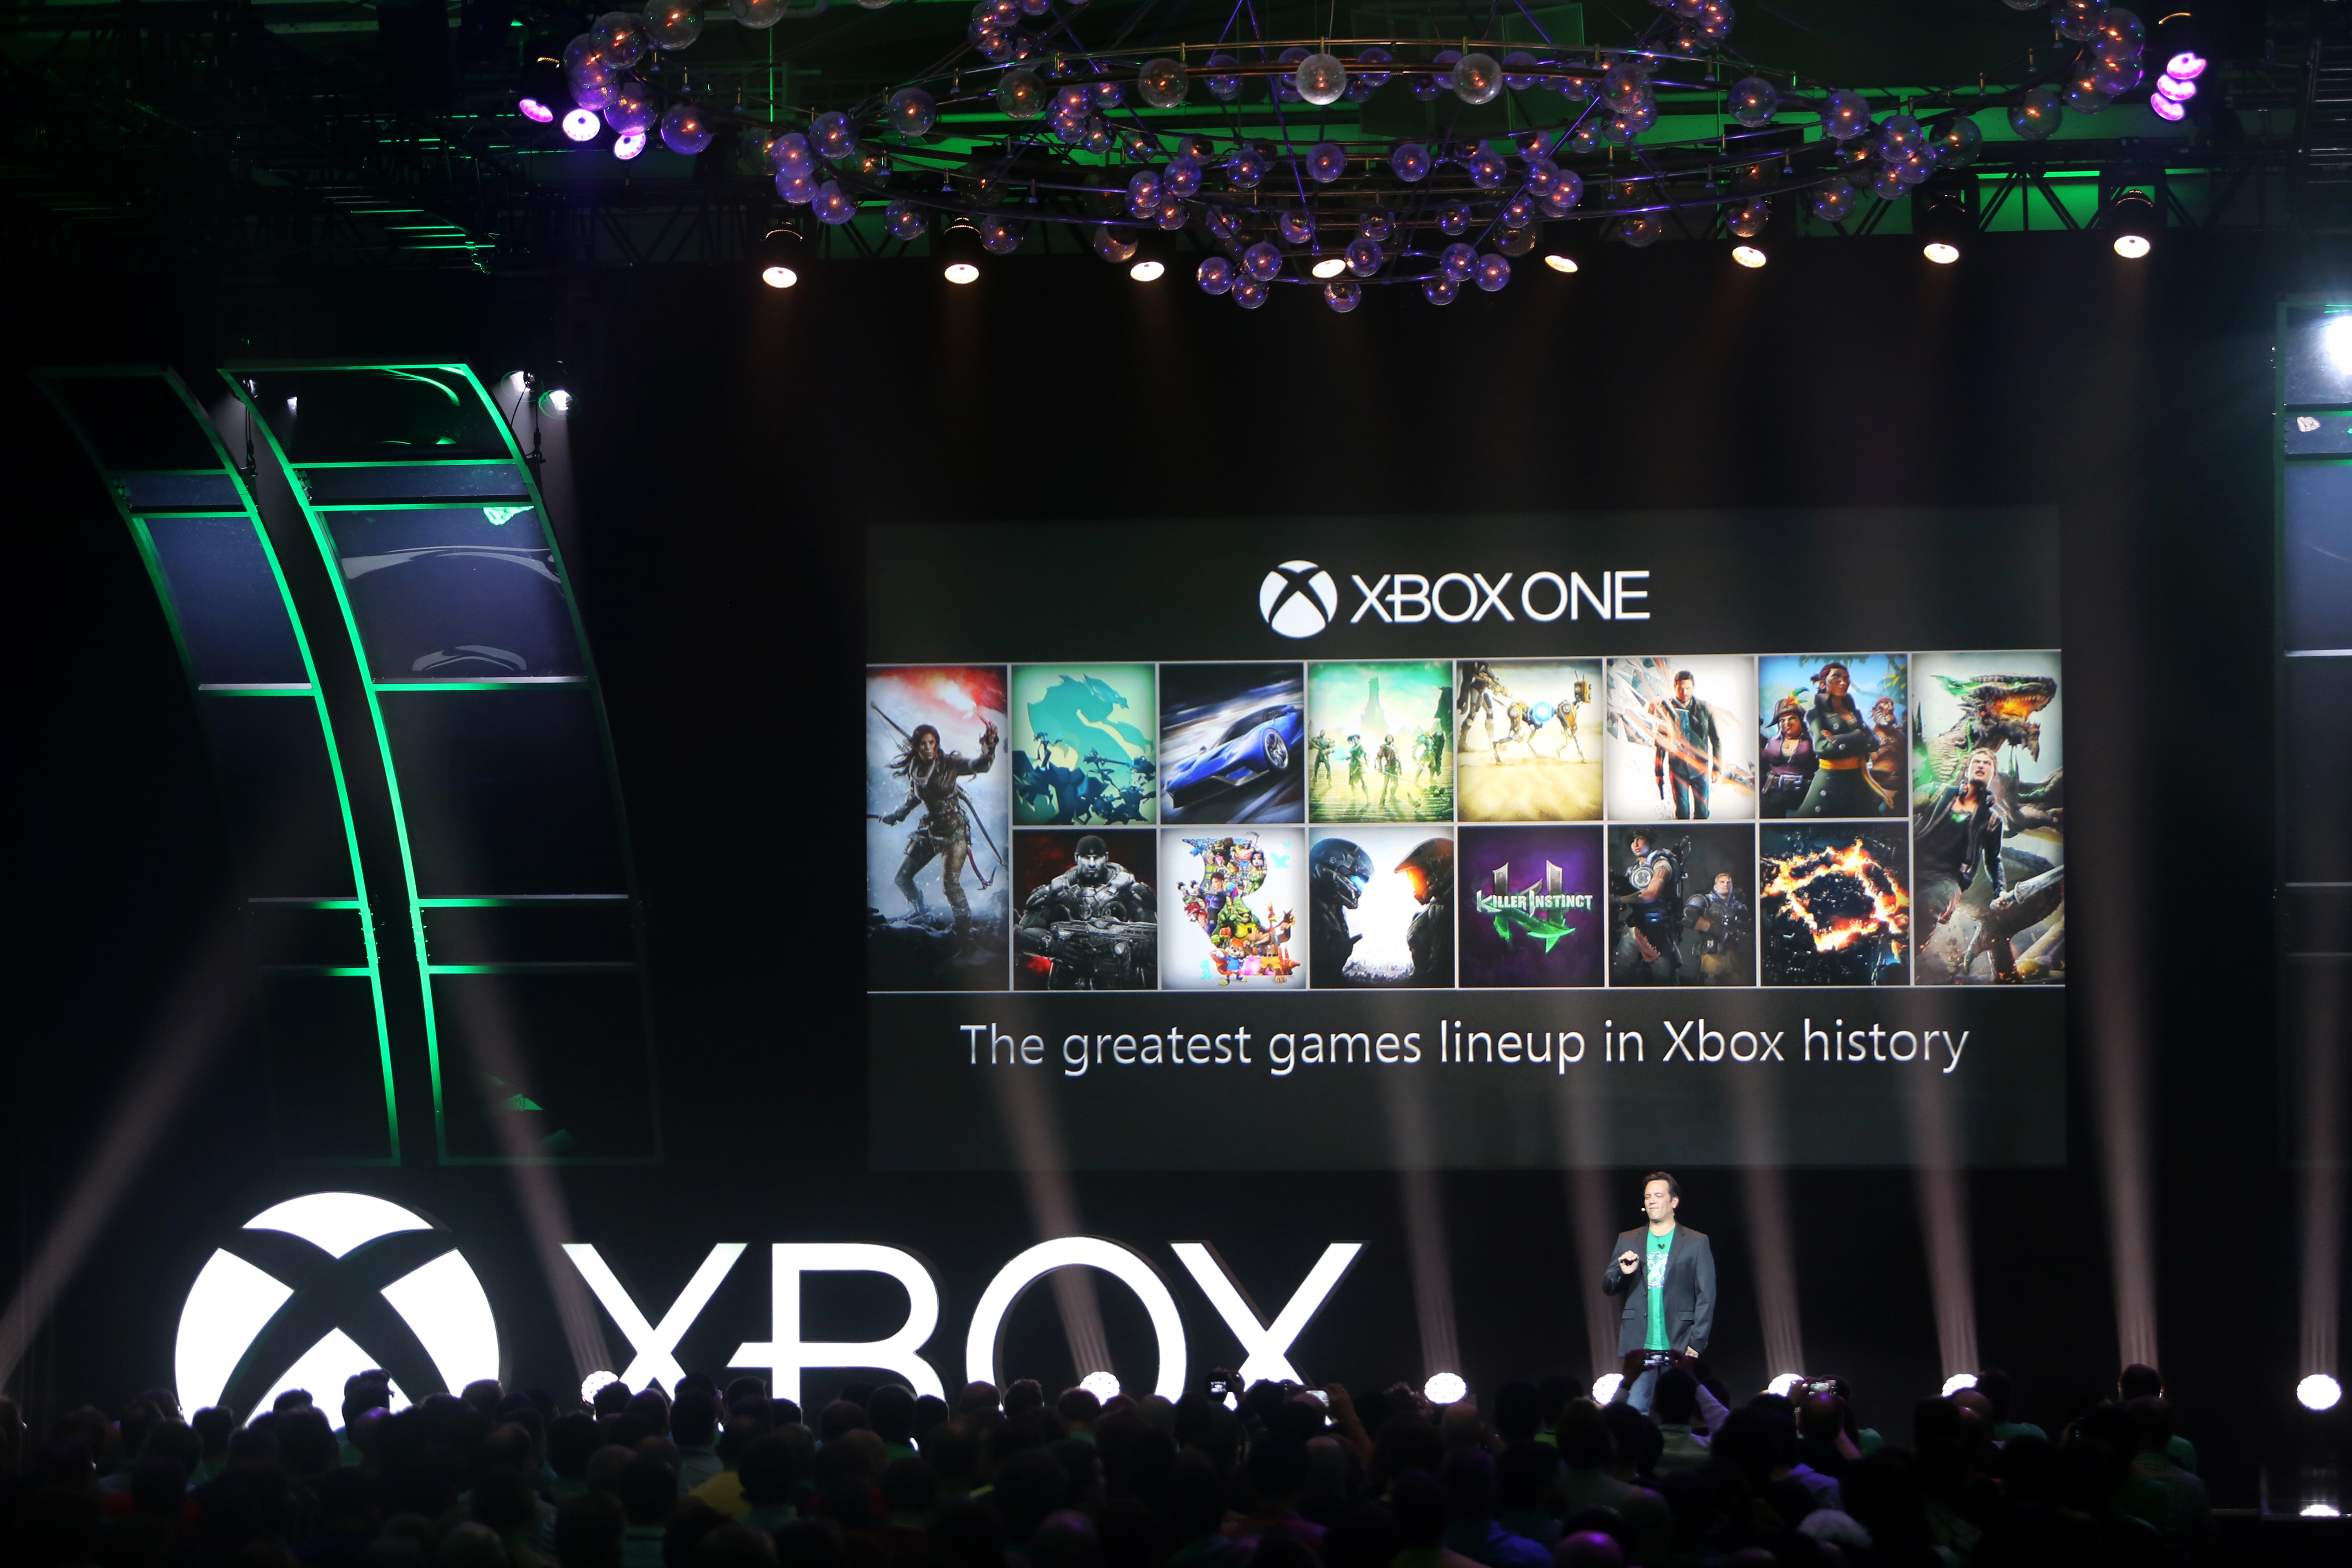 Xbox-gamescom-Briefing-2015-Phil-Spencer-Greatest-Lineup-in-Xbox-History-JPG.0.JPG